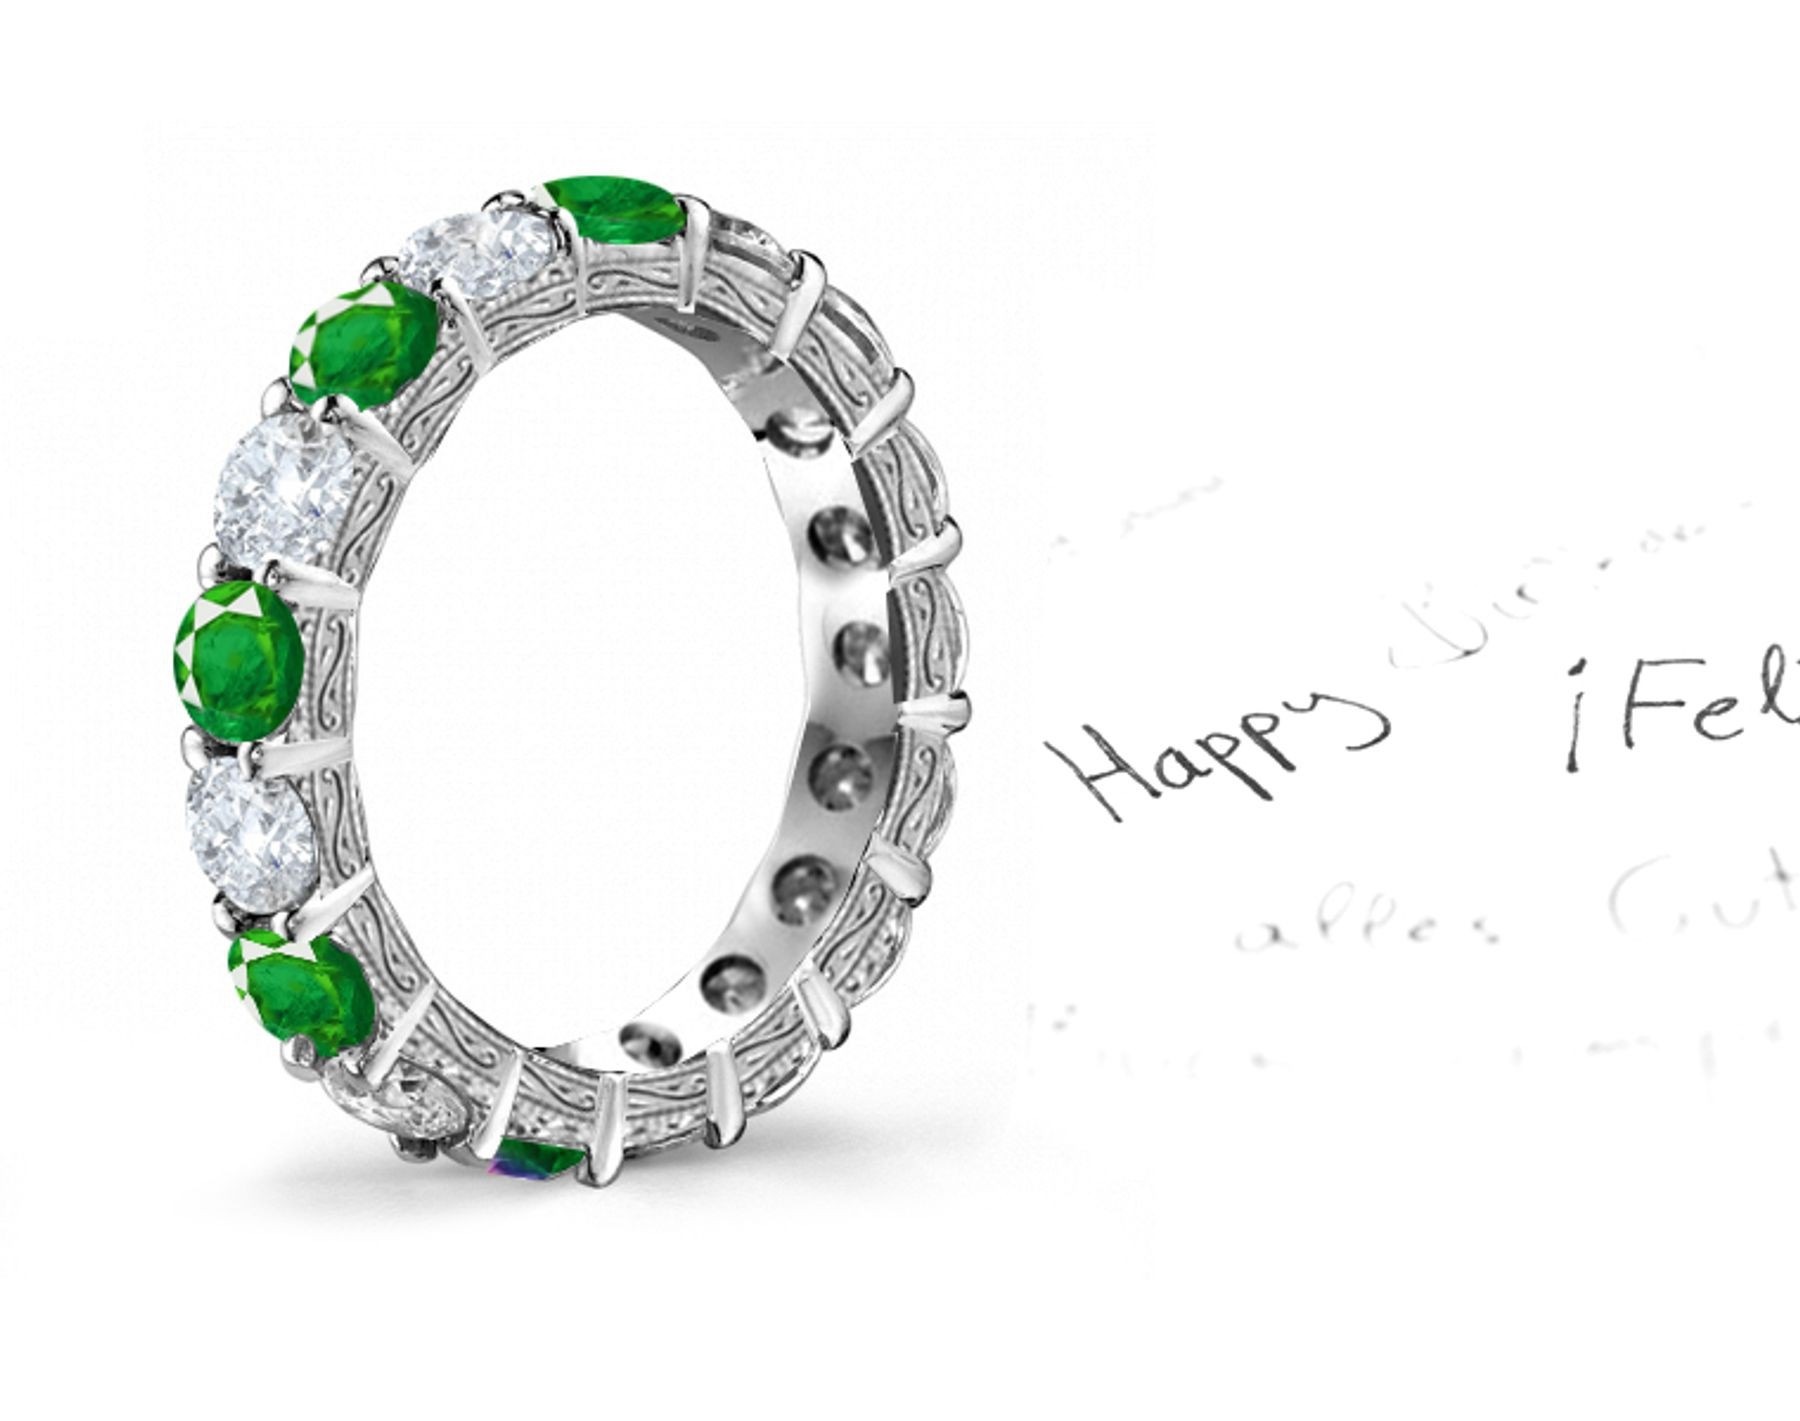 Fine Hand Engraved: Elegant Hand Engraved Diamond & Emerald Wedding Ring in Ring Size 3 to 8